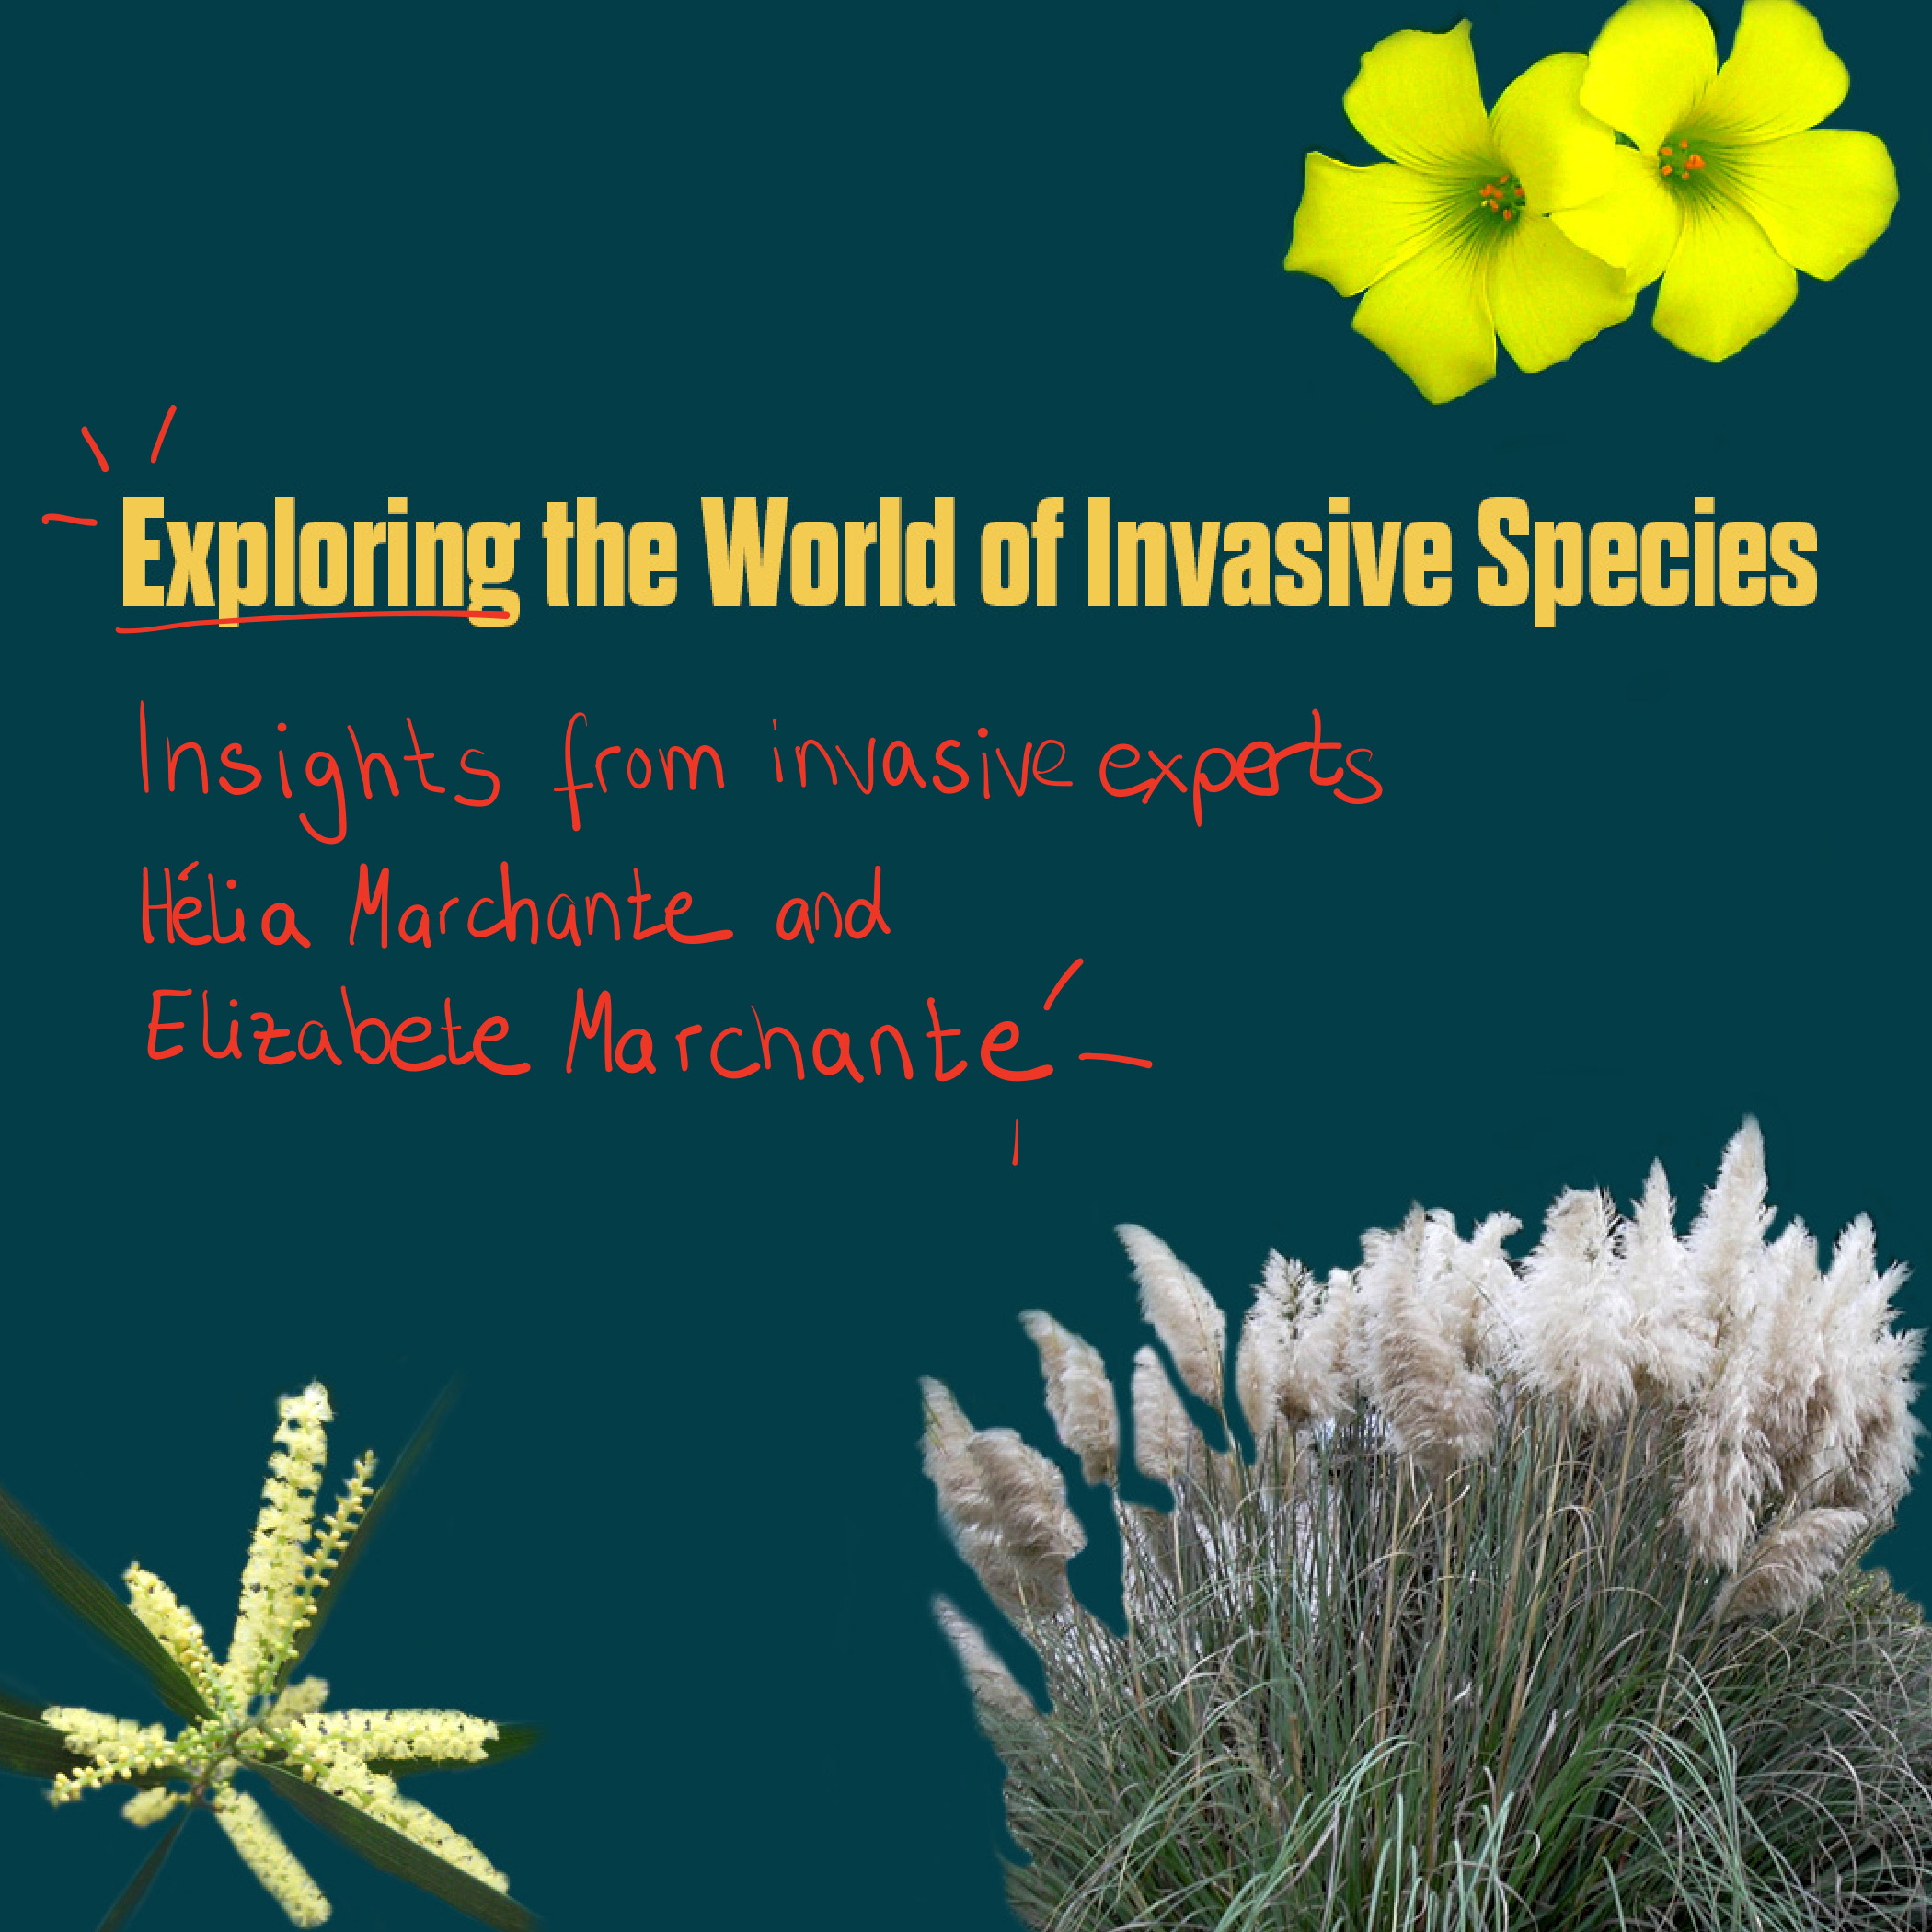 Image showing a few invasive plants in portugal and the following text: Exploring the World of Invasive Species: Insights from invasive species experts Hélia Marchante and Elizabete Marchante